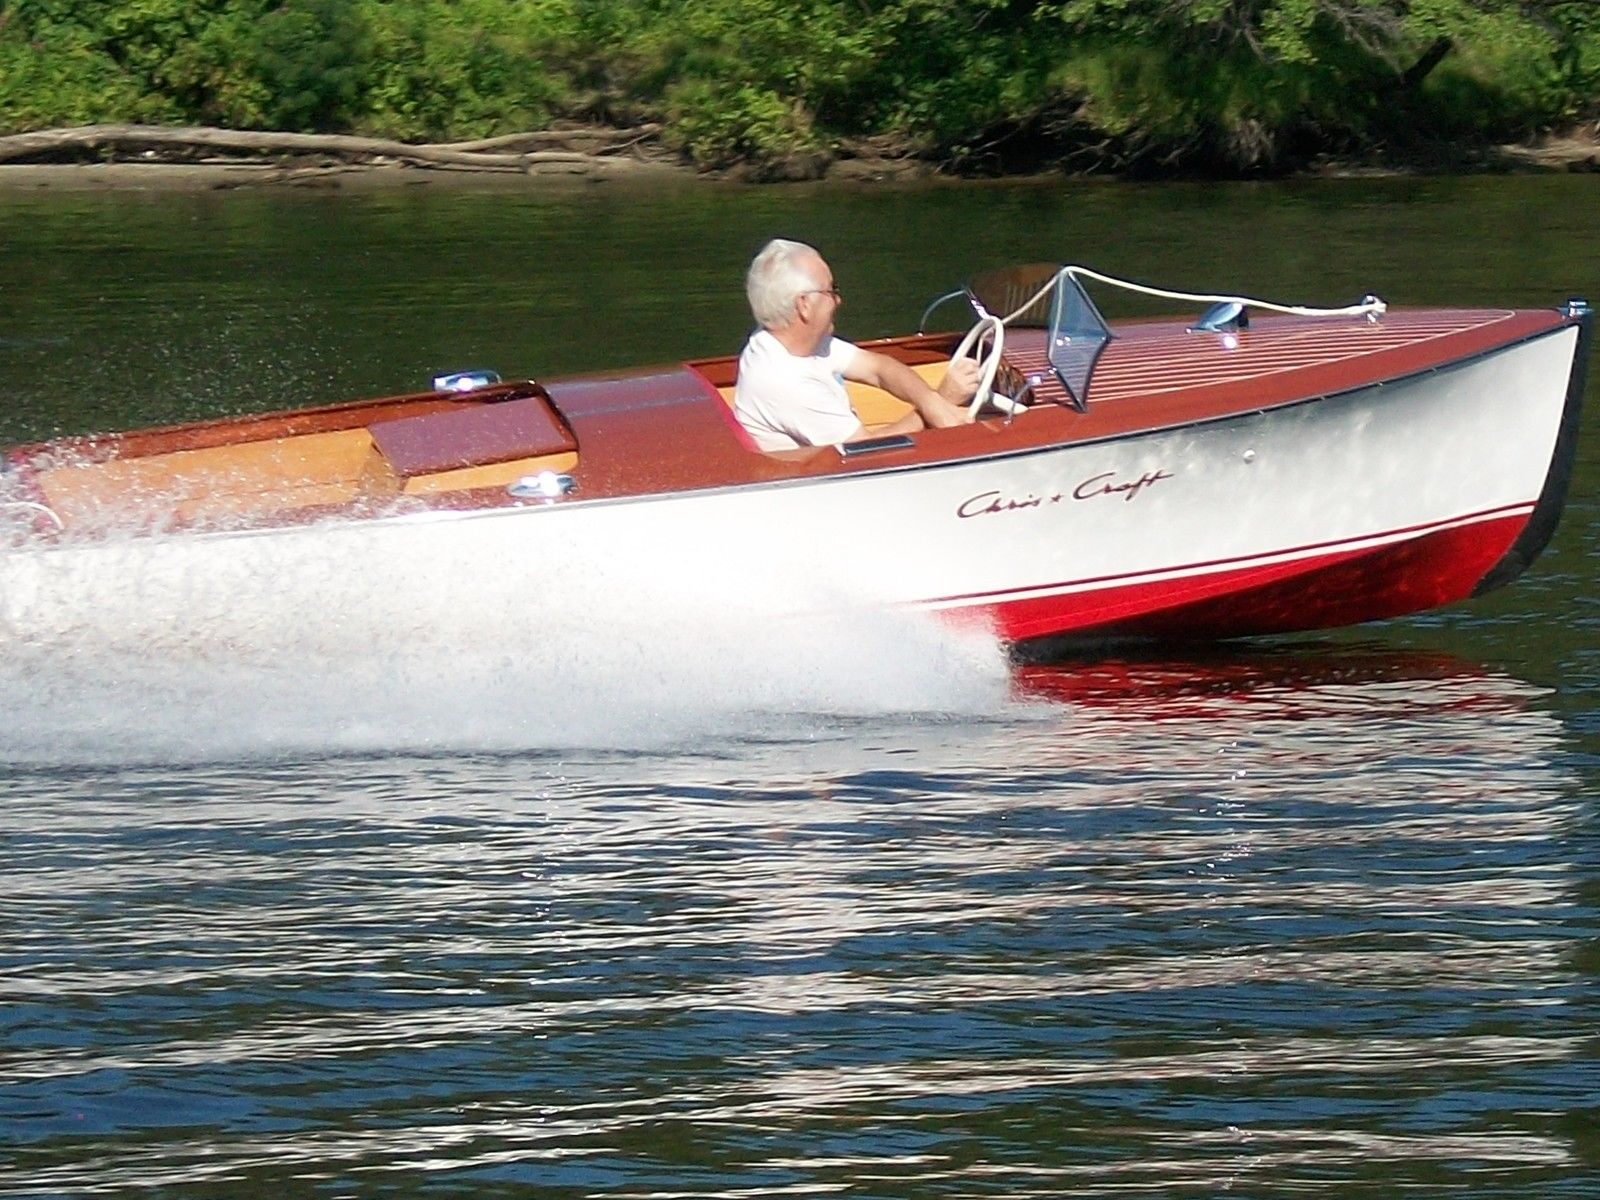 Chris Craft Special Runabout / Rocket 1947 for sale for 